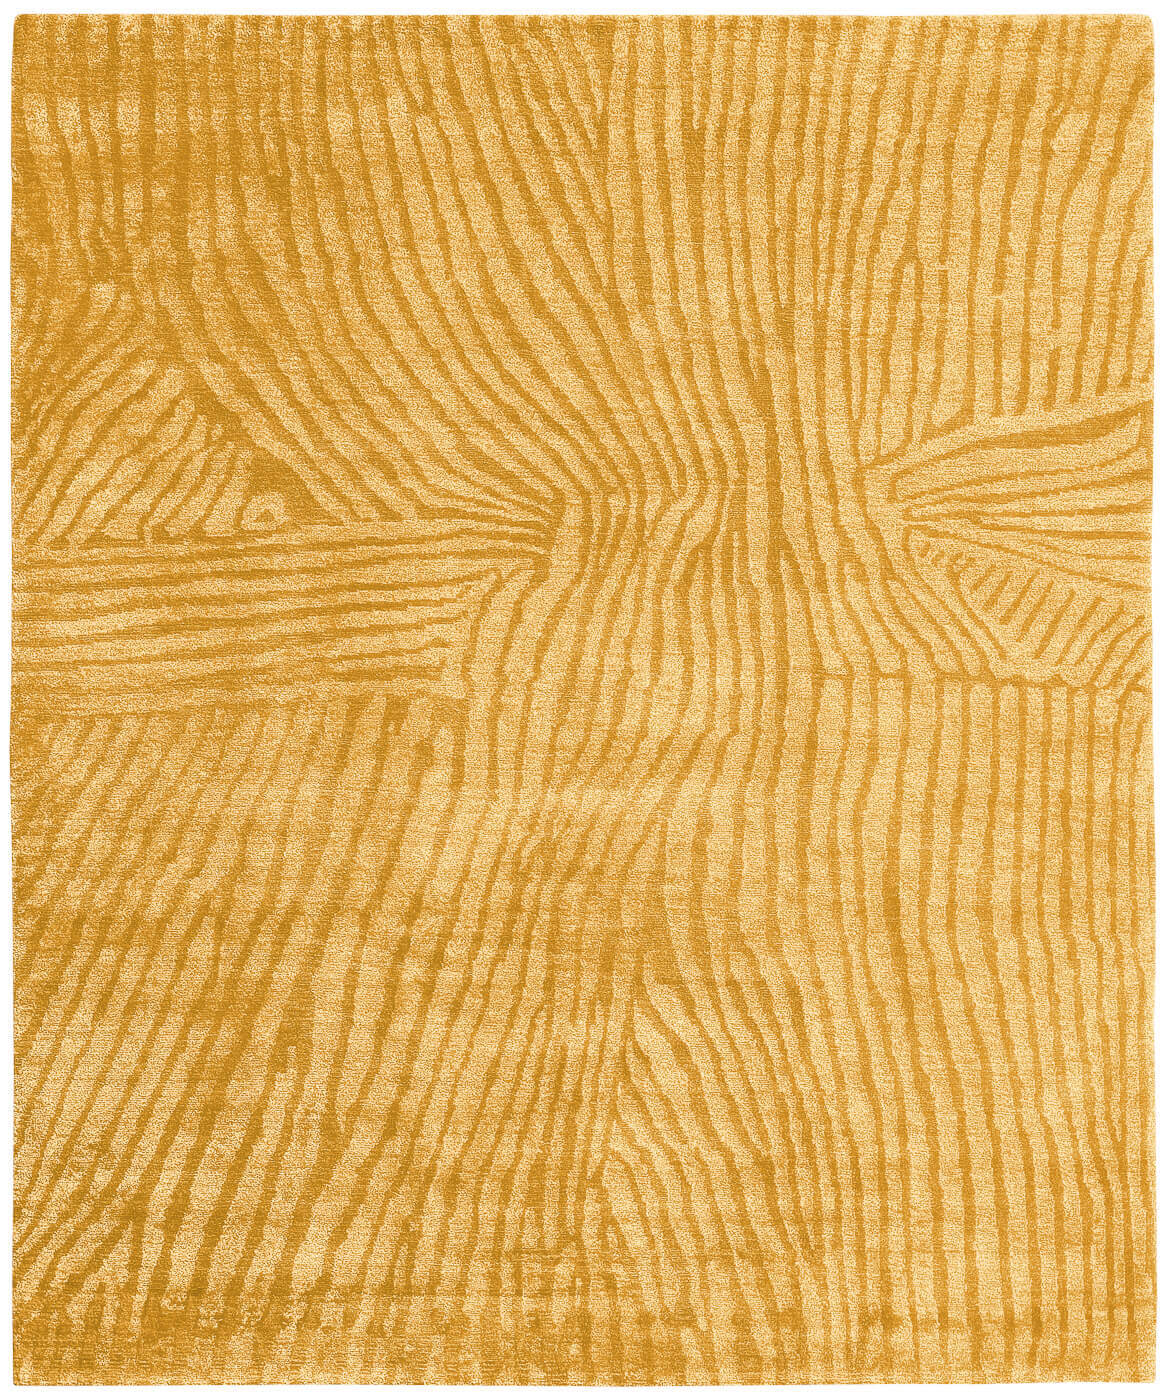 Hand-woven Gold Luxury Rug ☞ Size: 200 x 300 cm